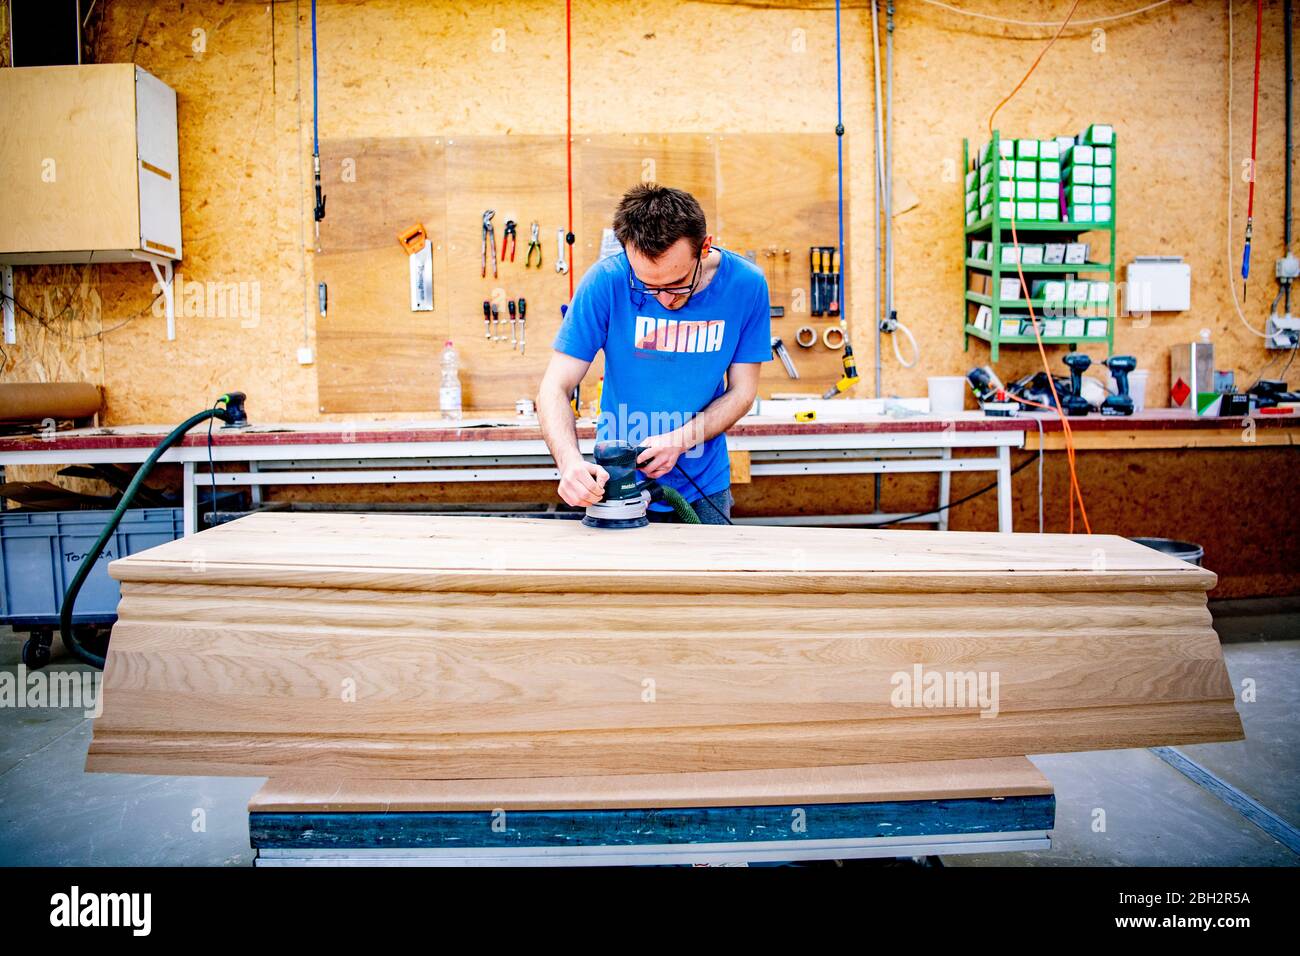 Gendringe, Netherlands. 23rd Apr, 2020. An employee making a casket at Tomba coffin maker.As the Coronavirus pandemic ravages Netherlands one coffin design firm south of Gendering has been busy delivering hundreds of caskets per week to double the usual production capacity. Coffin makers and the funeral industry at large are working hard. Credit: SOPA Images Limited/Alamy Live News Stock Photo